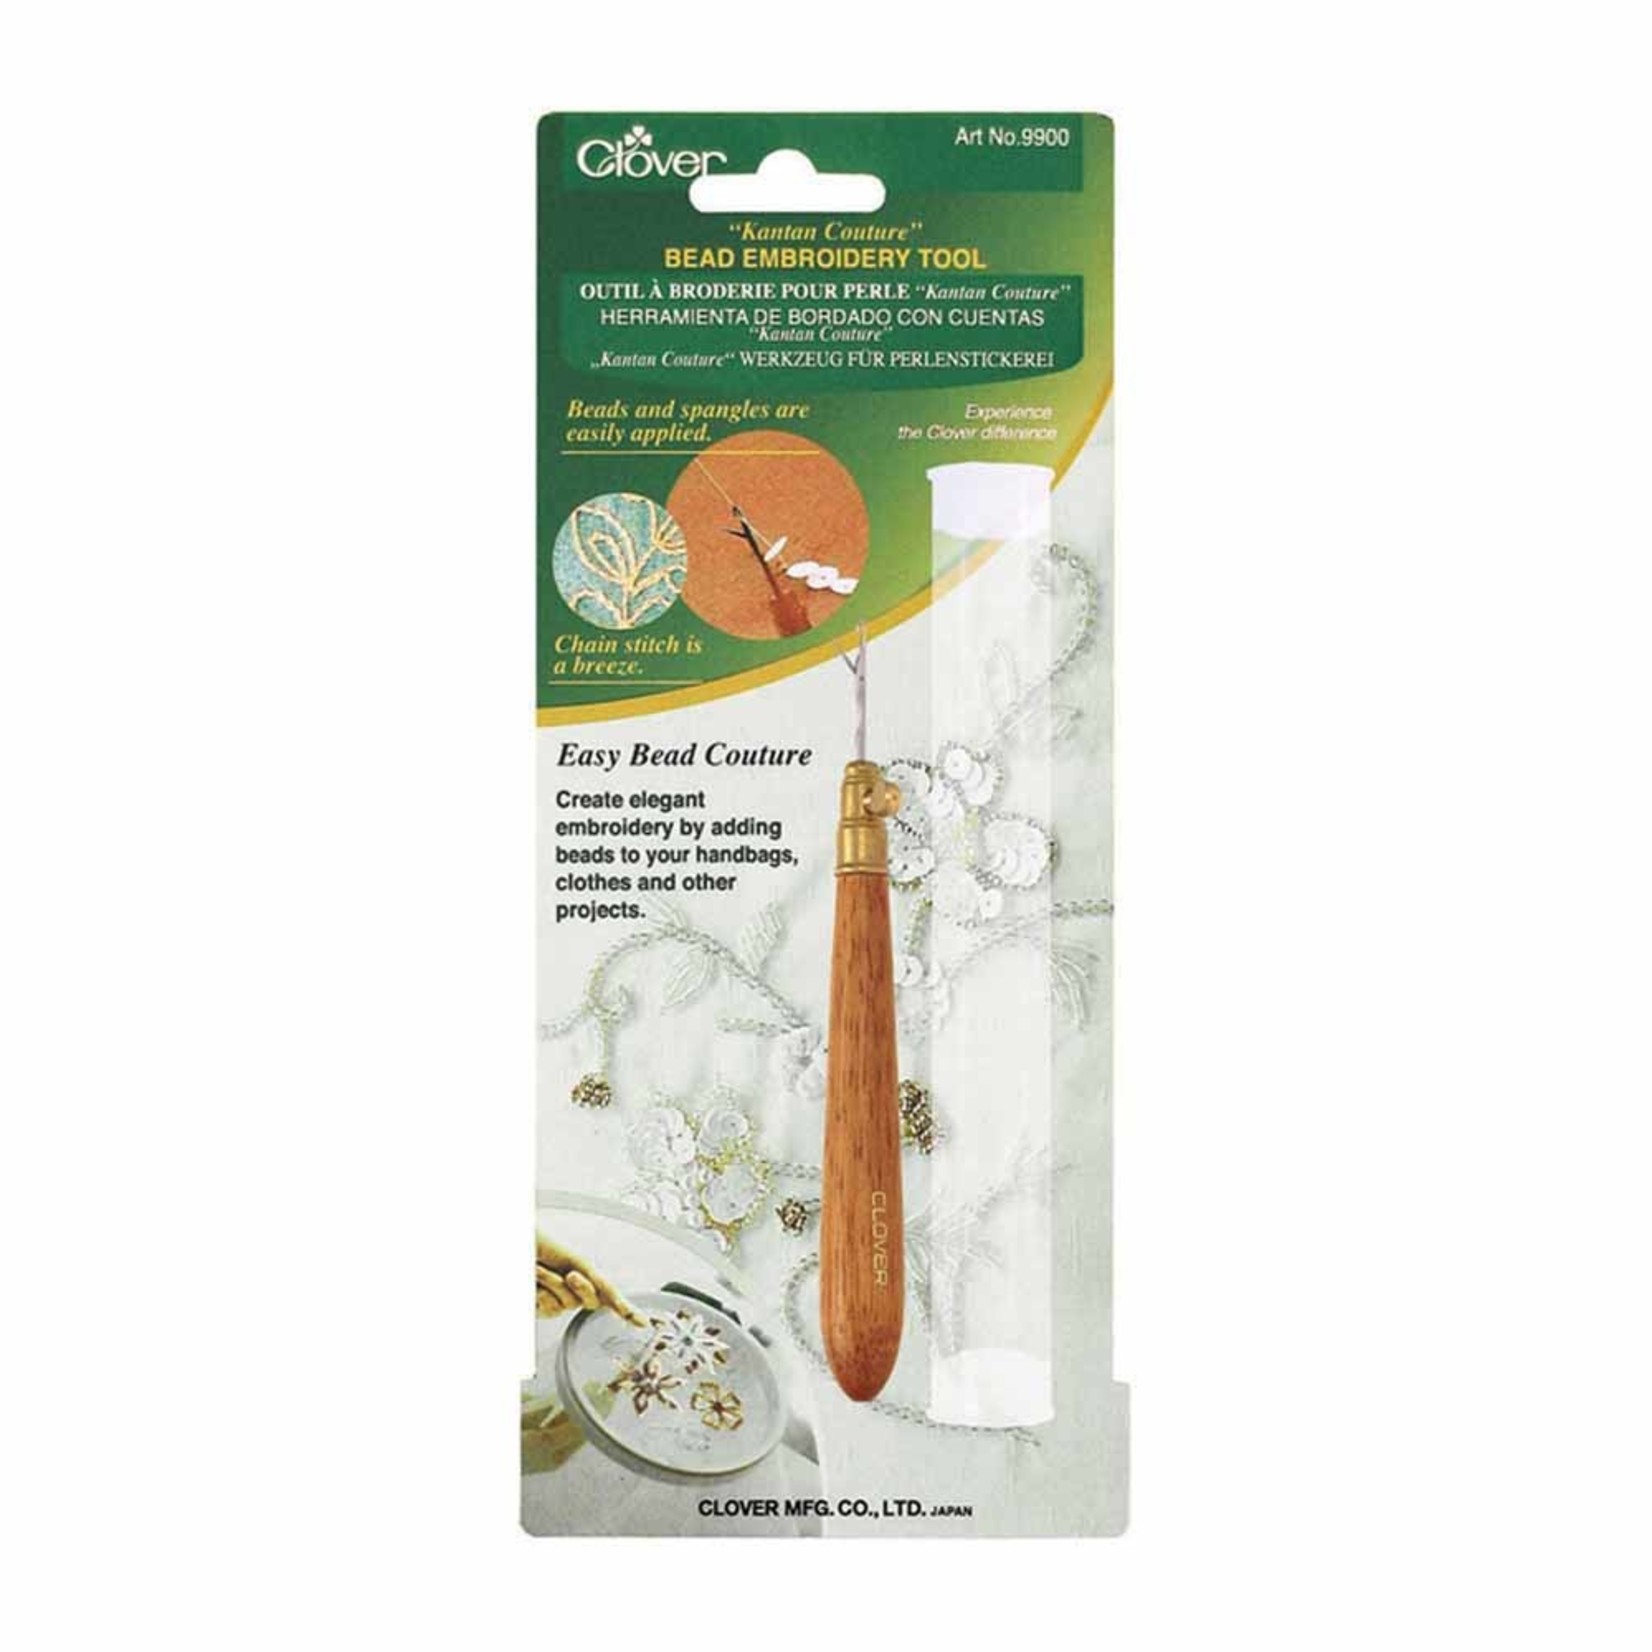 Clover Bead Embroidery Tool